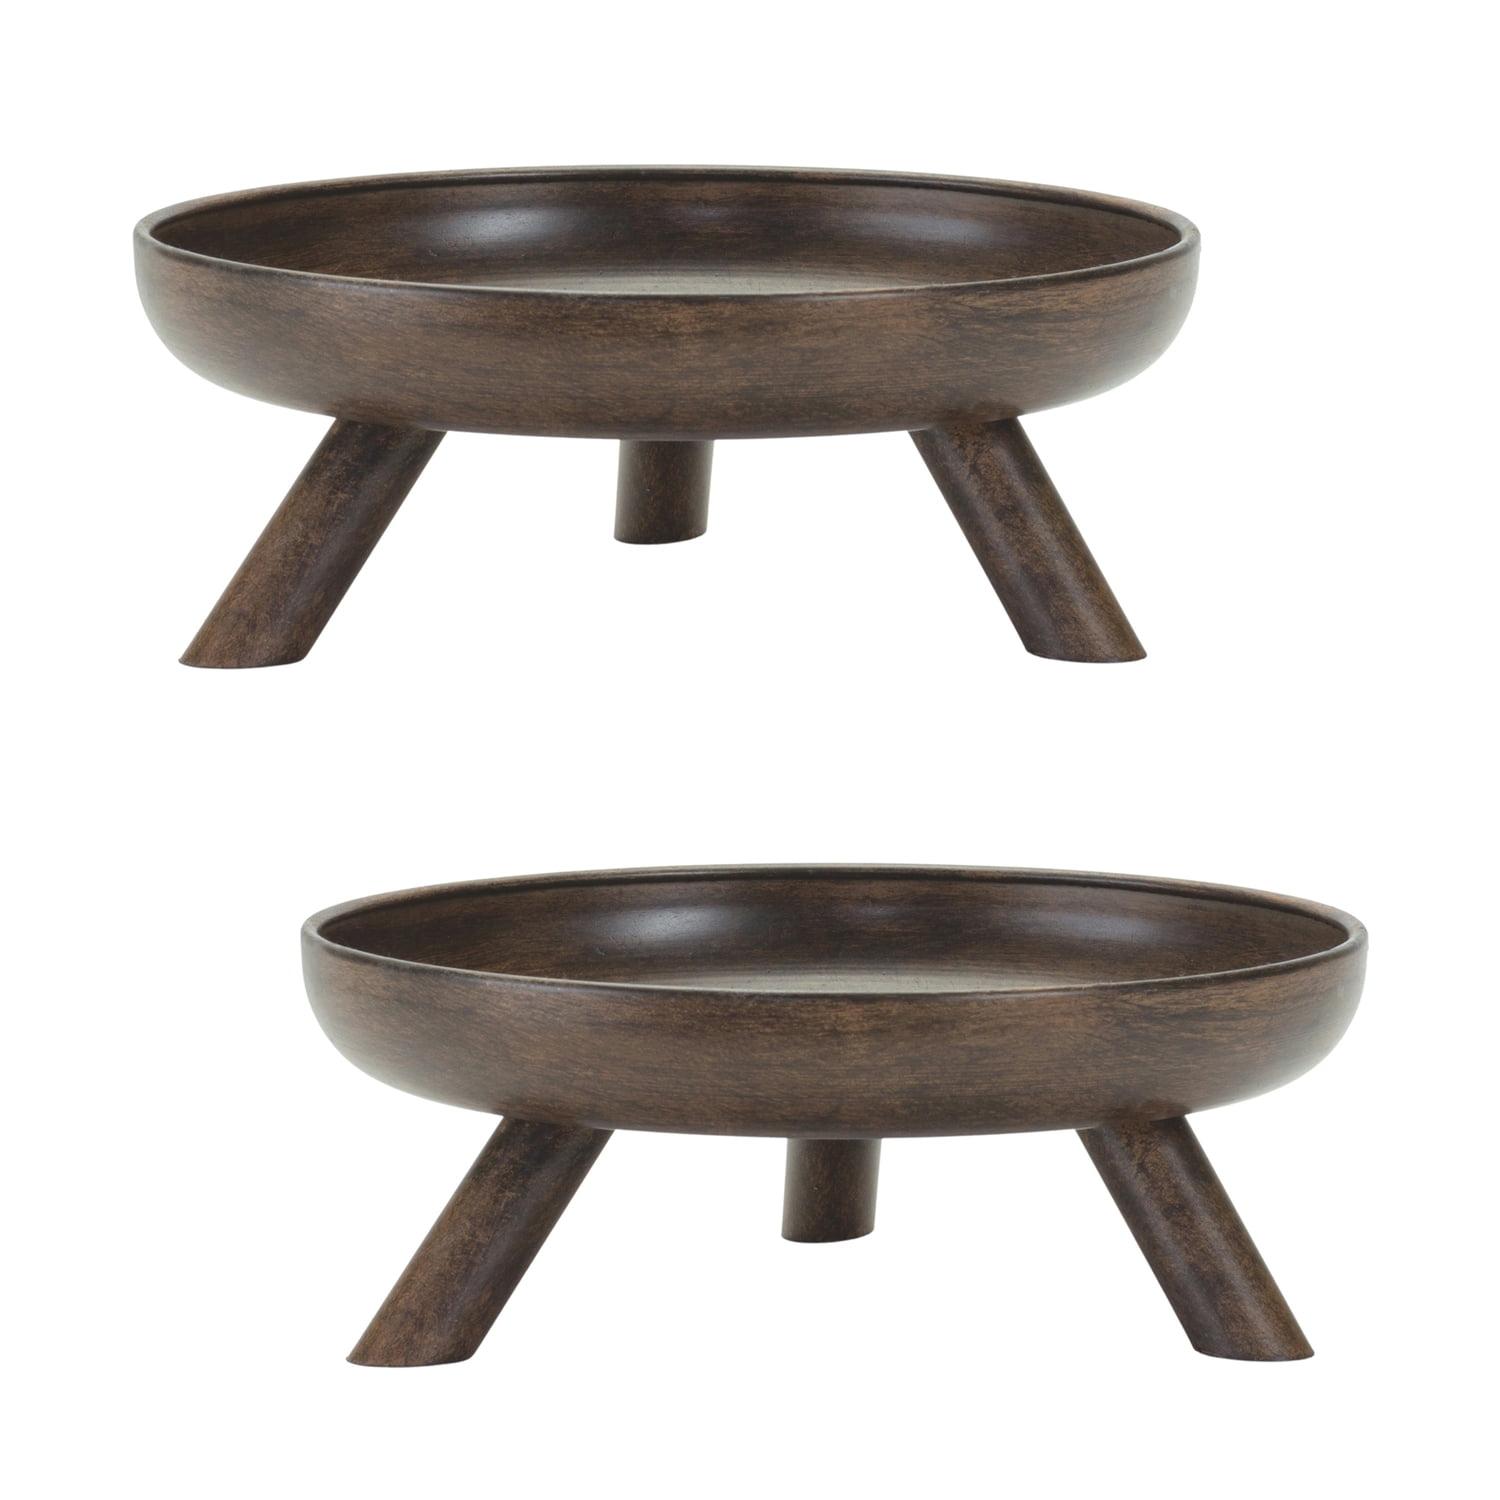 Brushed Metal Decorative Bowl Set with Modern Legs, 7.75"D x 3"H